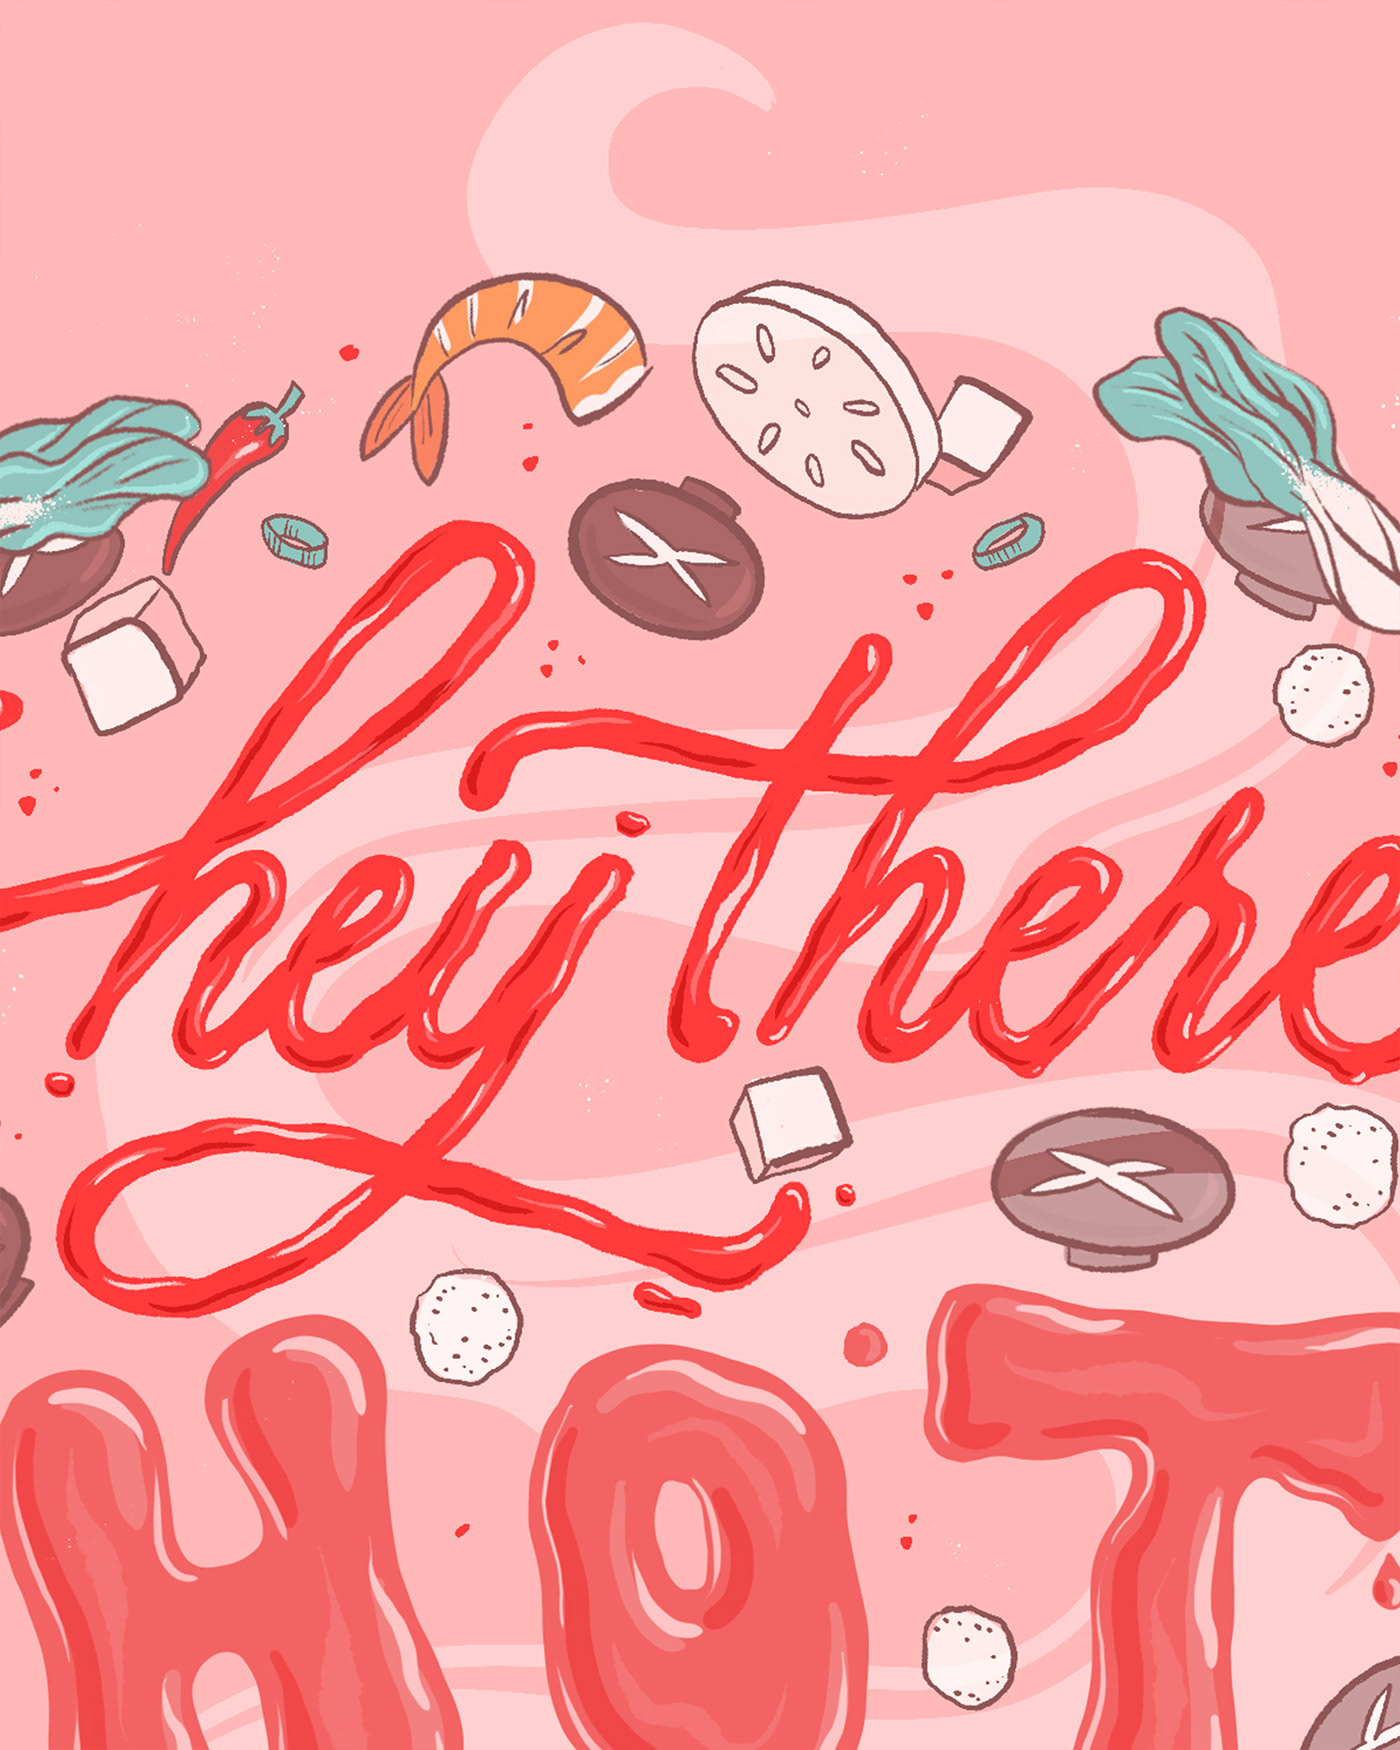 Close up of digital hand lettering "hey there" and food illustrations with steam